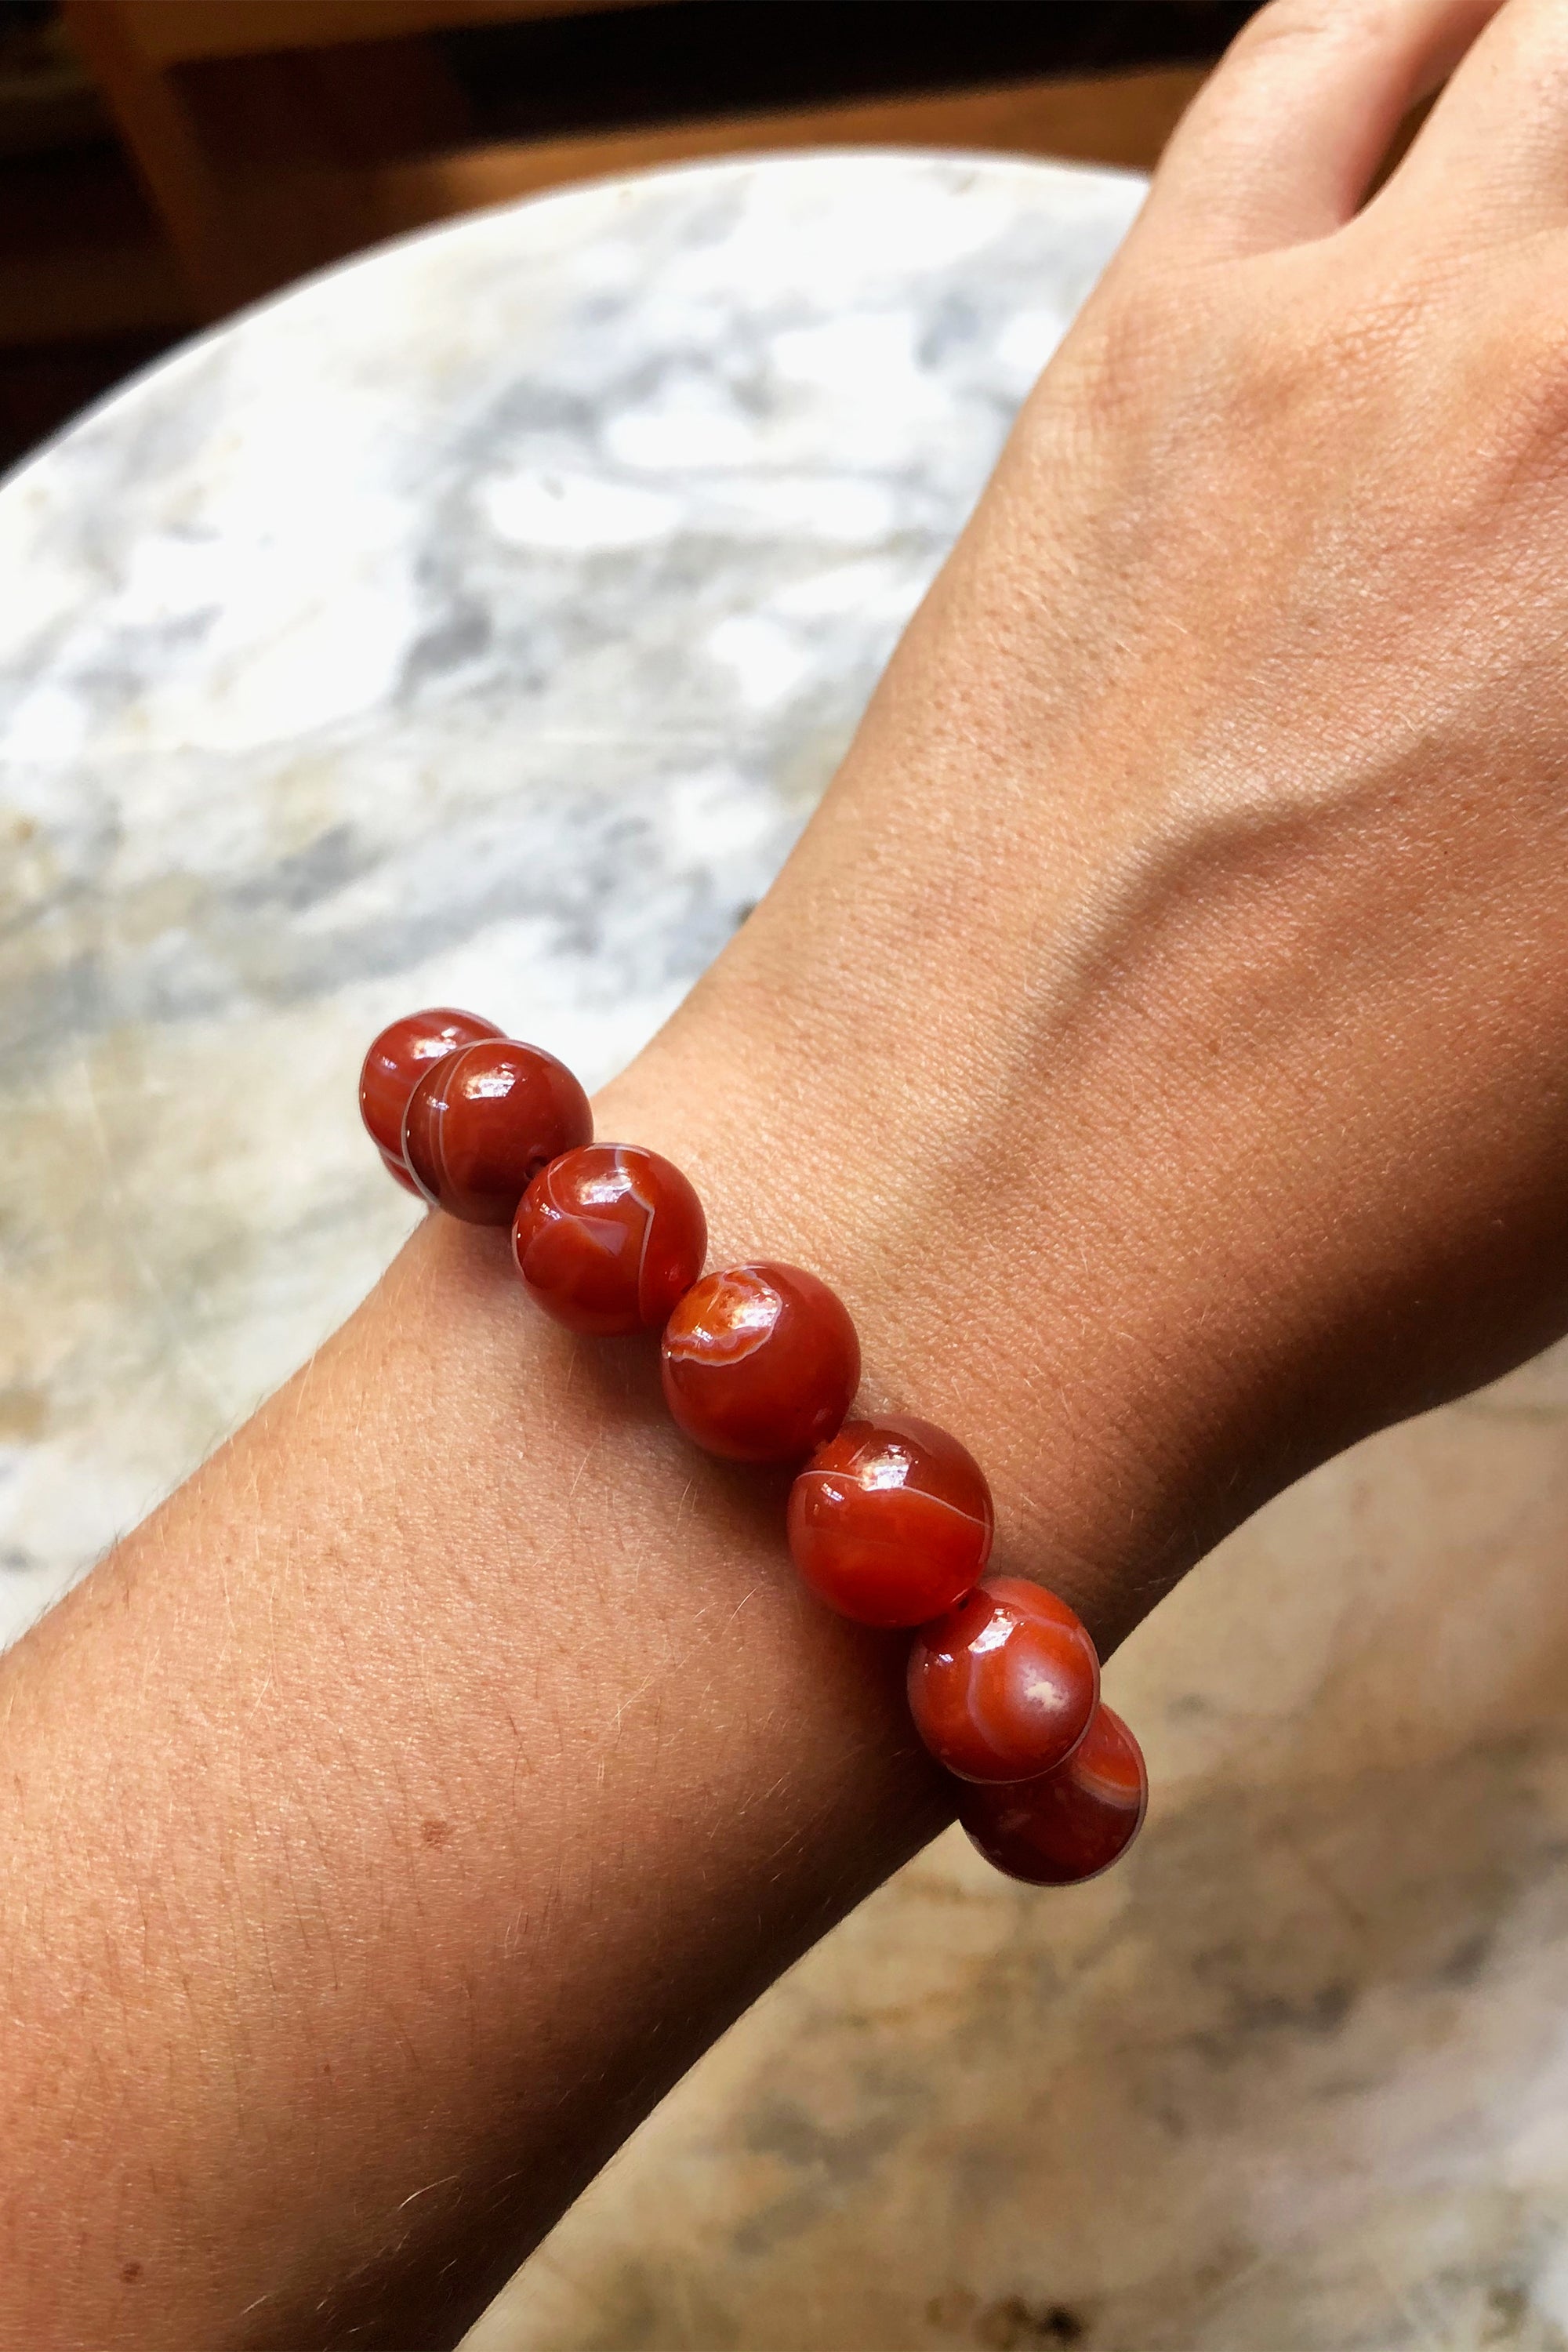 ACTUAL UNIT】Natural Mongolia South Red Agate Bracelet (天然蒙料南红玛瑙手串) |  Chakrasup.com is your one stop Gemstone & Crystal online store